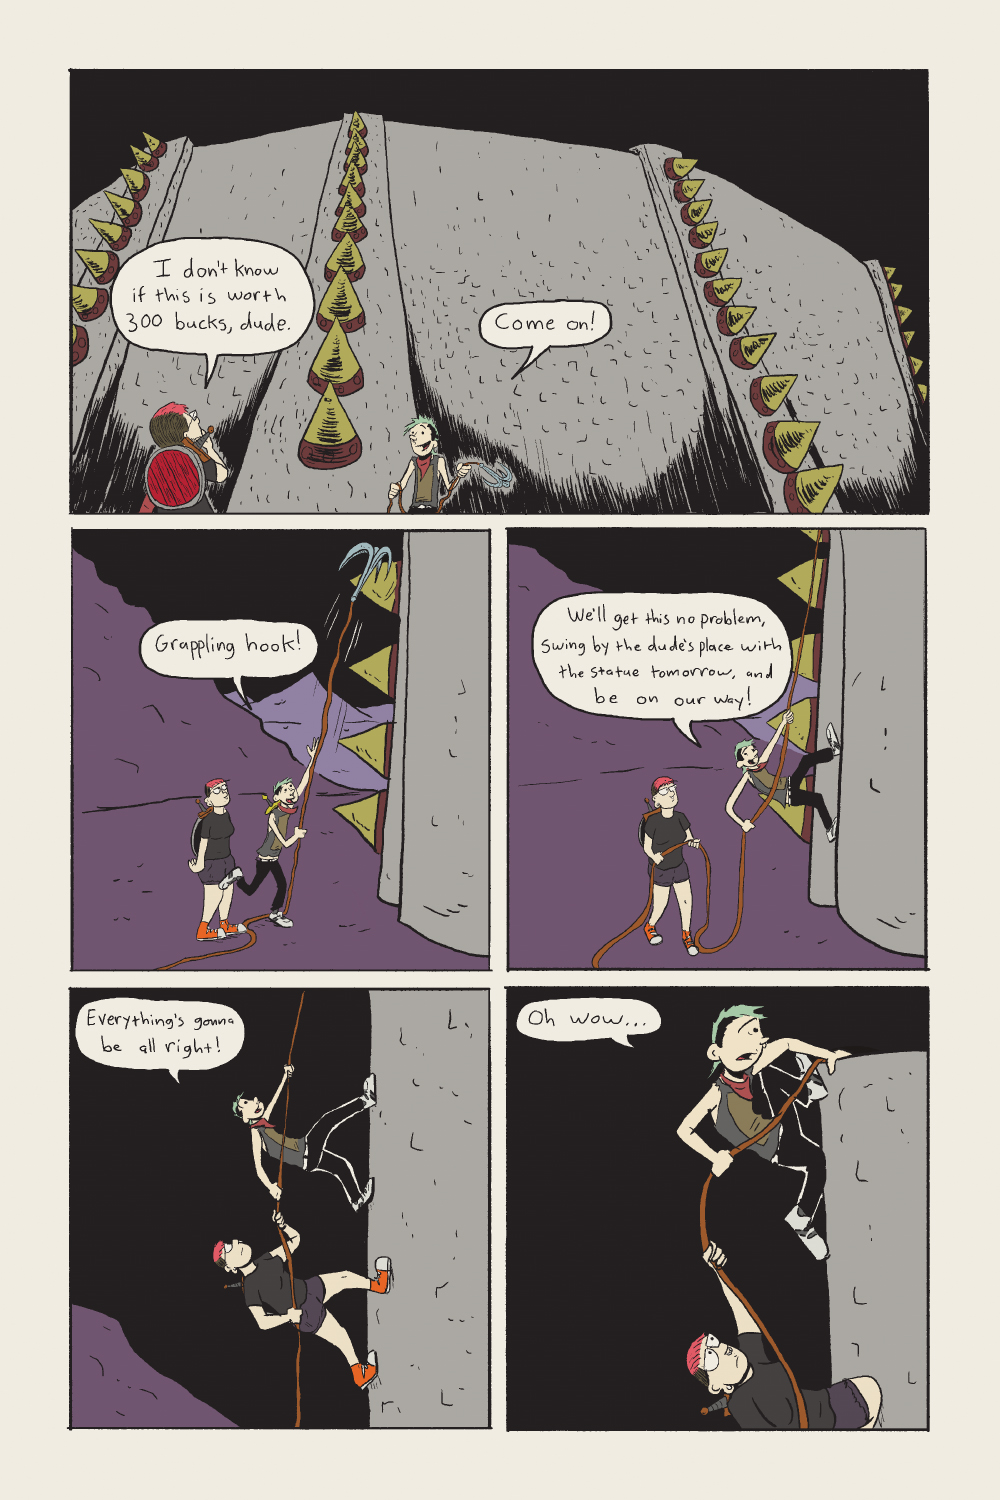 Read Quest Mania by Steve Thueson – Page 3 – Silver Sprocket